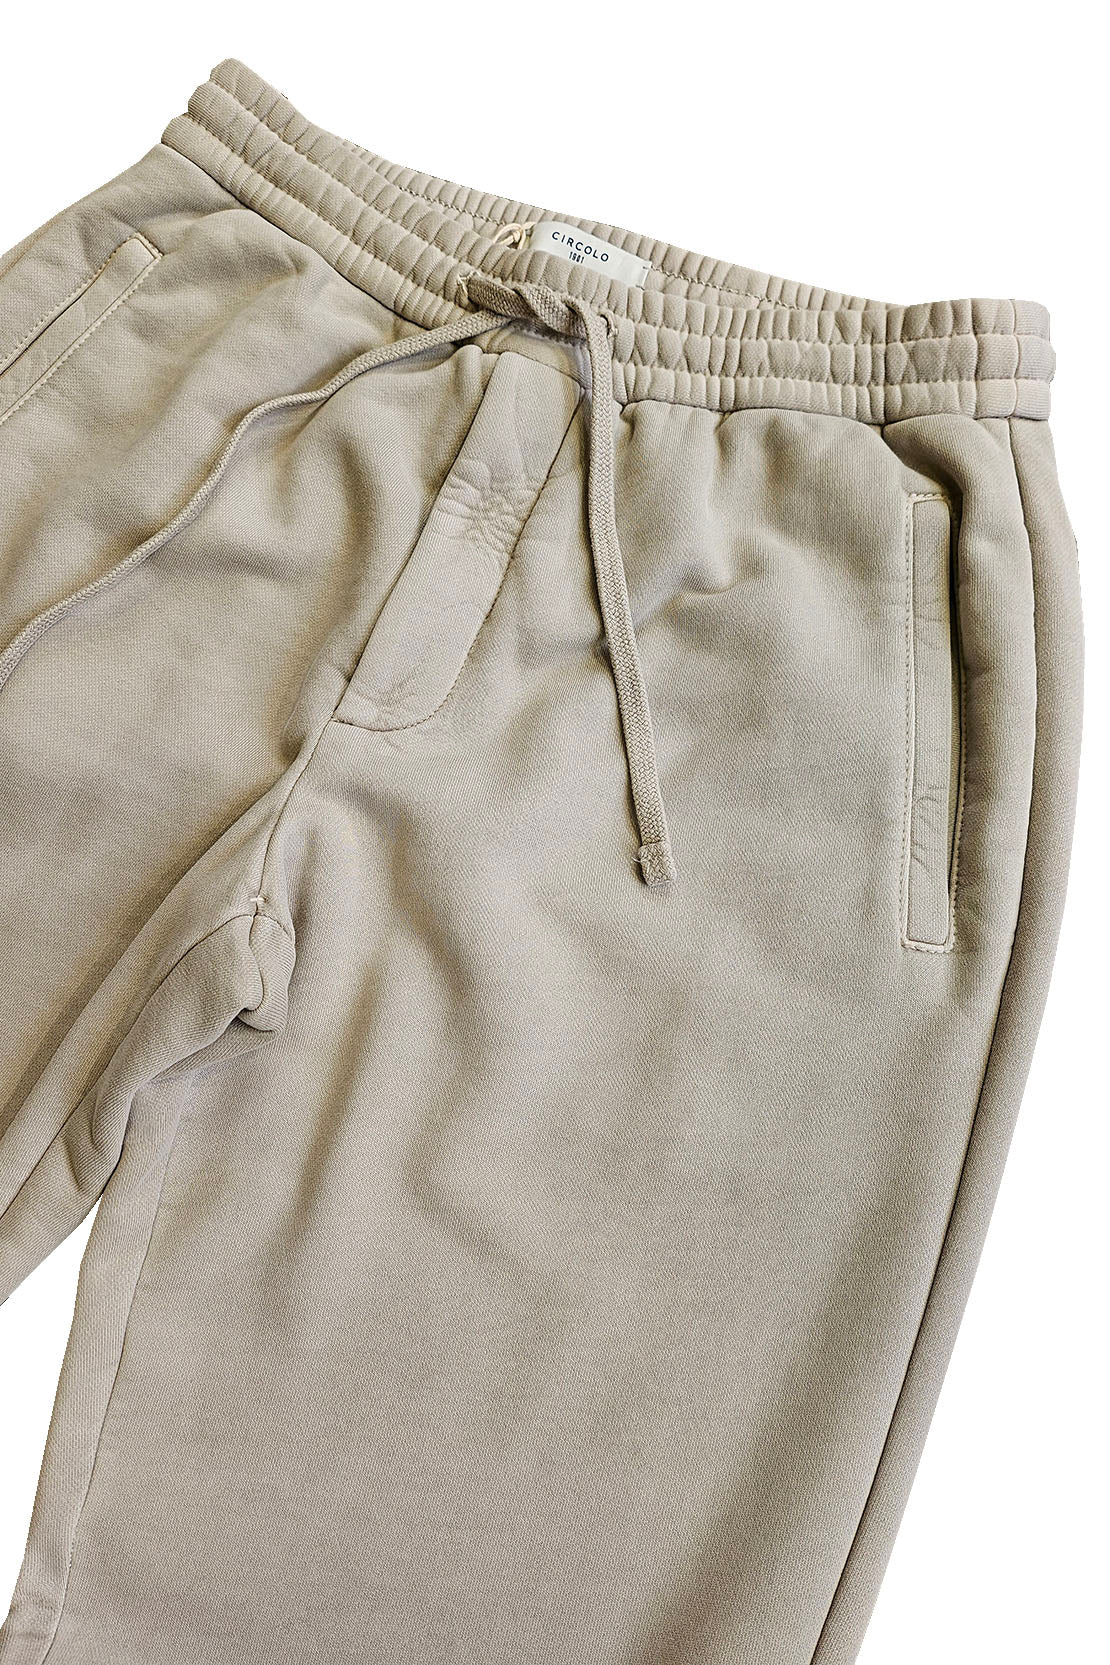 CIRCOLO - CN4028 Cashmere Touch Jogging Bottoms in Rainy Days Beige